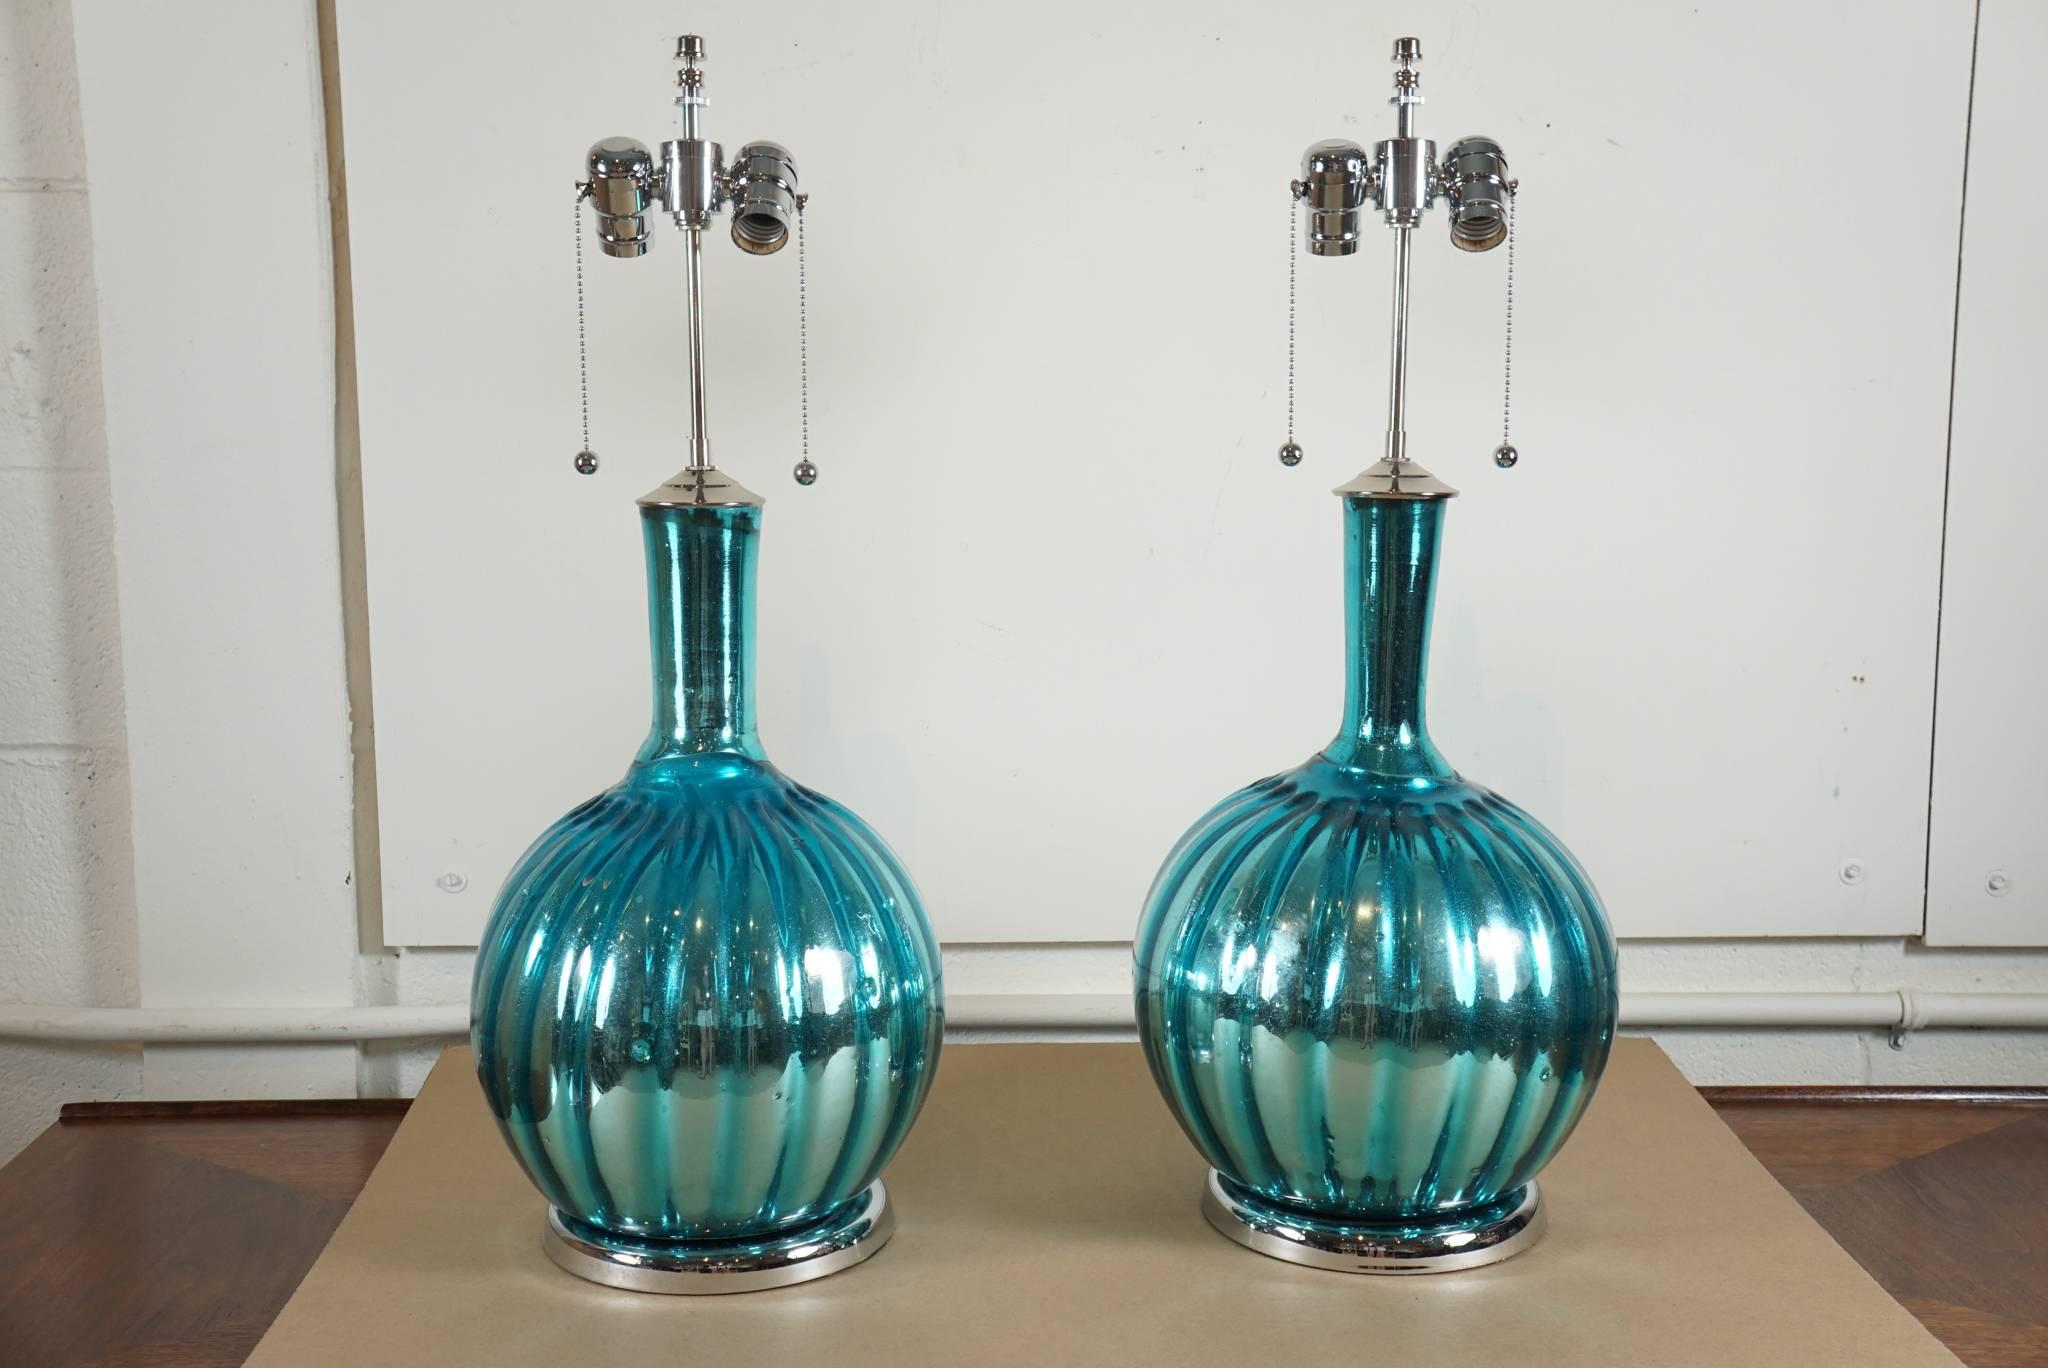 Here is a stunning pair of mercury lamps in an aqua blue color.
The lamps are in excellent condition with new chrome hardware and new wiring with double stem sockets. The top of the stem is 27 inches high and the base measures 18 inches high.